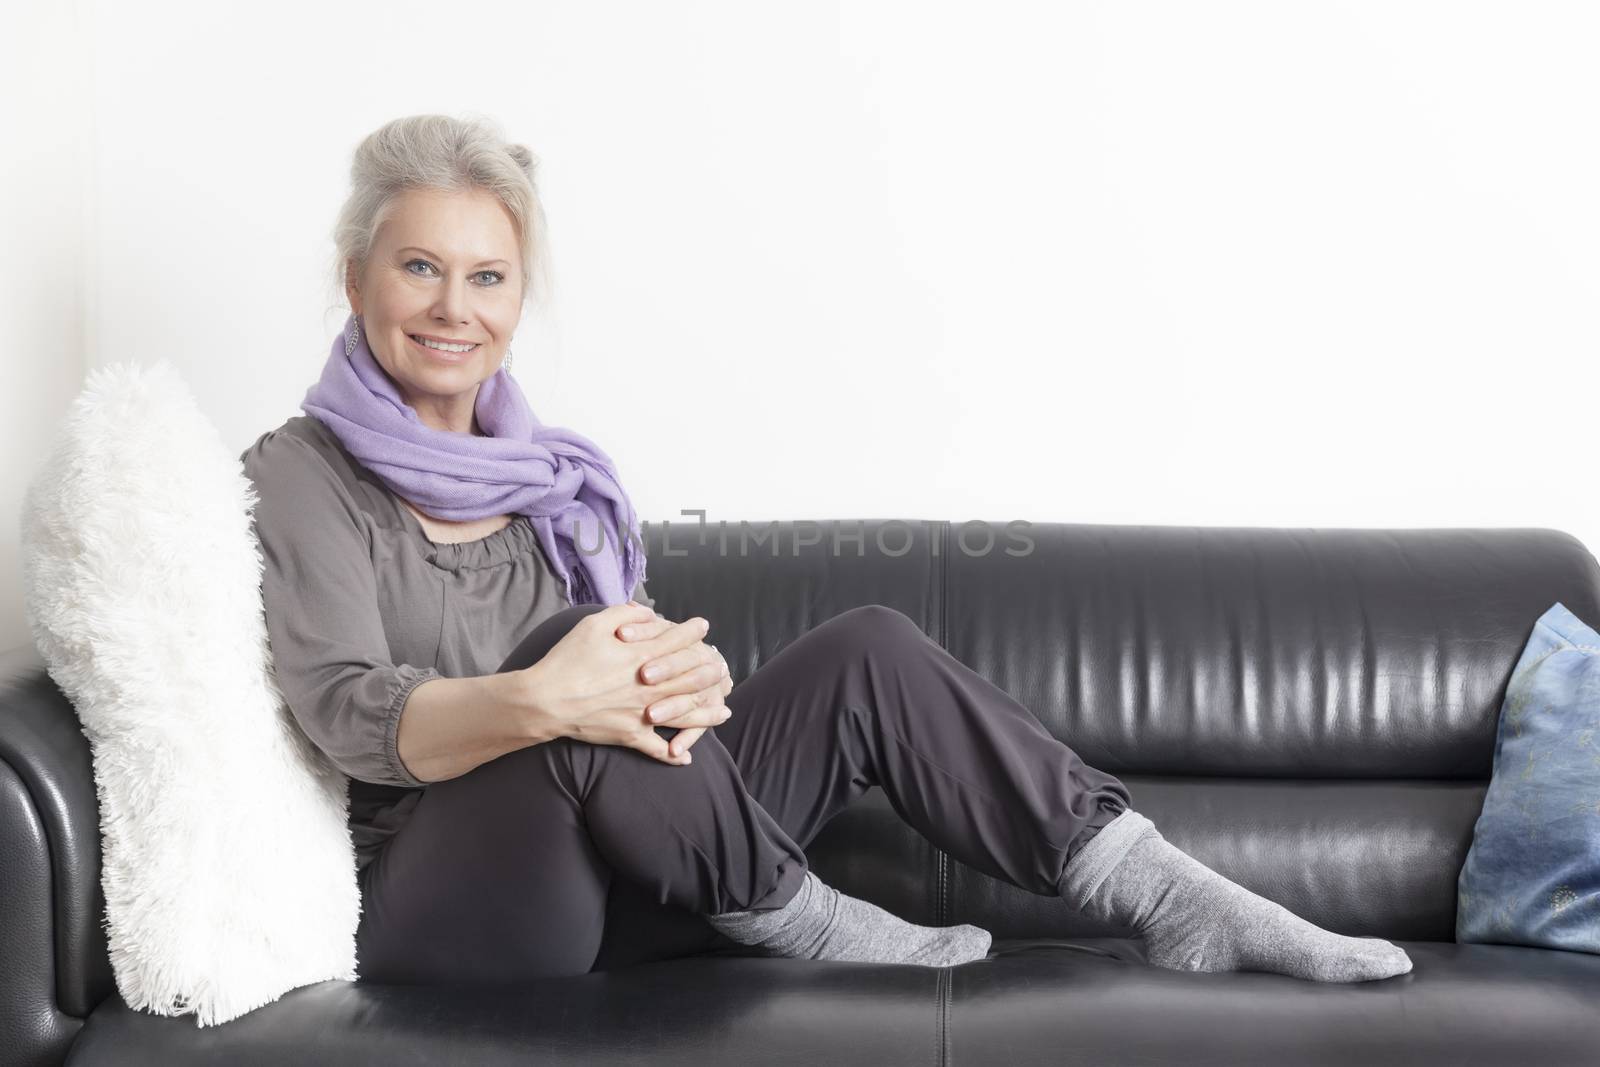 An image of a best age woman